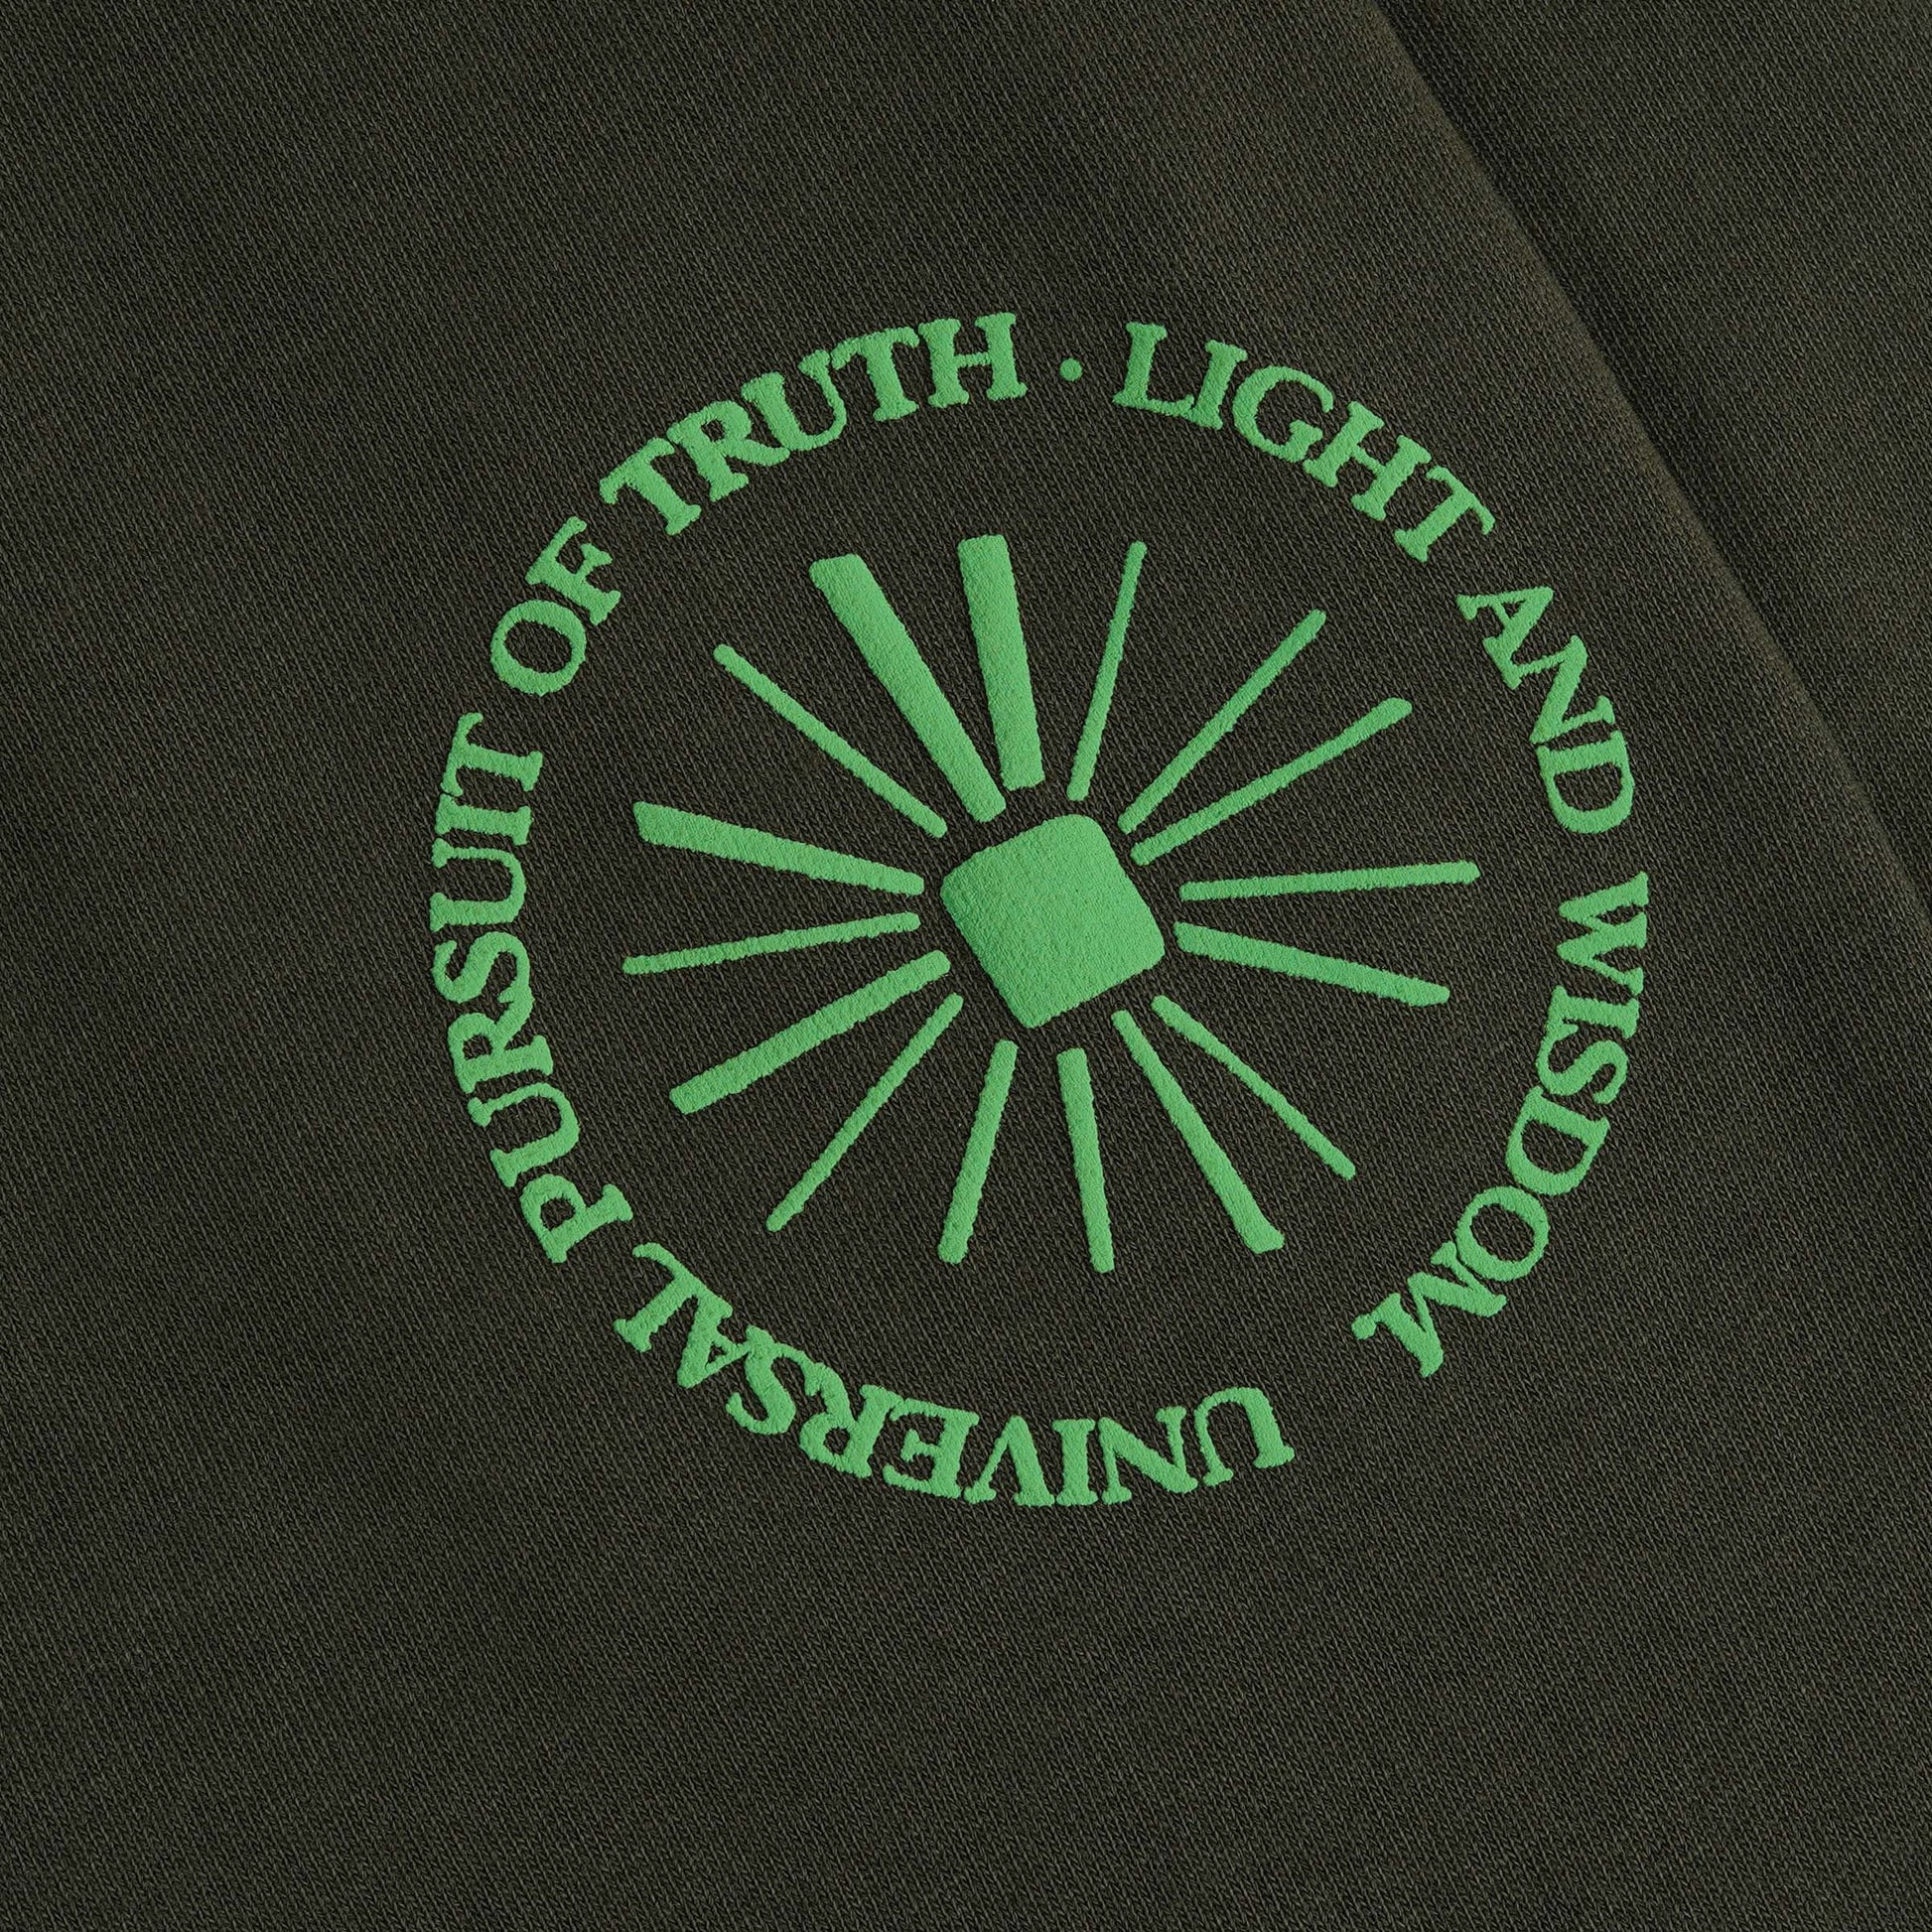 DETAIL VIEW OF UNIVERSAL PURSUIT OF TRUTH, LIGHT, AND WISDOM TEXT GRAPHIC 